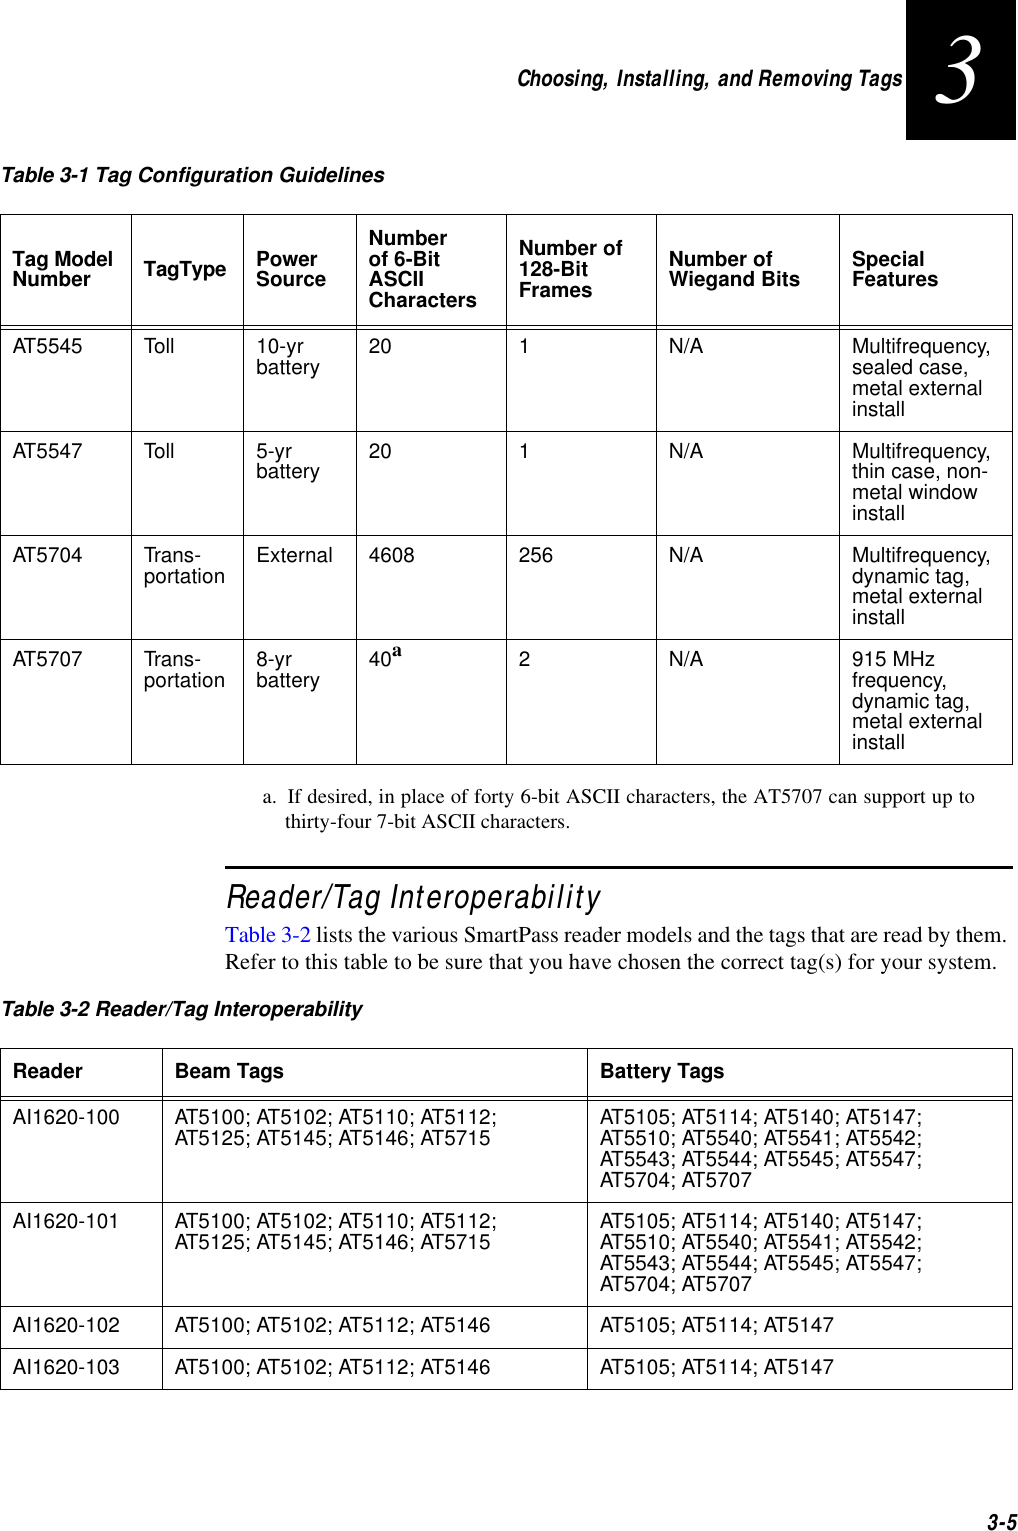 Choosing, Installing, and Removing Tags3-53a. If desired, in place of forty 6-bit ASCII characters, the AT5707 can support up tothirty-four 7-bit ASCII characters. Reader/Tag InteroperabilityTable 3-2 lists the various SmartPass reader models and the tags that are read by them. Refer to this table to be sure that you have chosen the correct tag(s) for your system. AT5545 Toll 10-yr battery 20 1 N/A Multifrequency, sealed case, metal external installAT5547 Toll 5-yr battery 20 1 N/A Multifrequency, thin case, non-metal window installAT5704 Trans-portation External 4608 256 N/A Multifrequency, dynamic tag, metal external installAT5707 Trans-portation 8-yr battery 40a2N/A 915 MHz frequency, dynamic tag, metal external installTable 3-1 Tag Configuration GuidelinesTag Model Number TagType Power SourceNumber of 6-Bit ASCIICharactersNumber of 128-Bit FramesNumber of Wiegand Bits Special FeaturesTable 3-2 Reader/Tag InteroperabilityReader Beam Tags Battery TagsAI1620-100 AT5100; AT5102; AT5110; AT5112; AT5125; AT5145; AT5146; AT5715 AT5105; AT5114; AT5140; AT5147; AT5510; AT5540; AT5541; AT5542; AT5543; AT5544; AT5545; AT5547; AT5704; AT5707AI1620-101 AT5100; AT5102; AT5110; AT5112; AT5125; AT5145; AT5146; AT5715  AT5105; AT5114; AT5140; AT5147; AT5510; AT5540; AT5541; AT5542; AT5543; AT5544; AT5545; AT5547; AT5704; AT5707AI1620-102 AT5100; AT5102; AT5112; AT5146 AT5105; AT5114; AT5147AI1620-103 AT5100; AT5102; AT5112; AT5146 AT5105; AT5114; AT5147